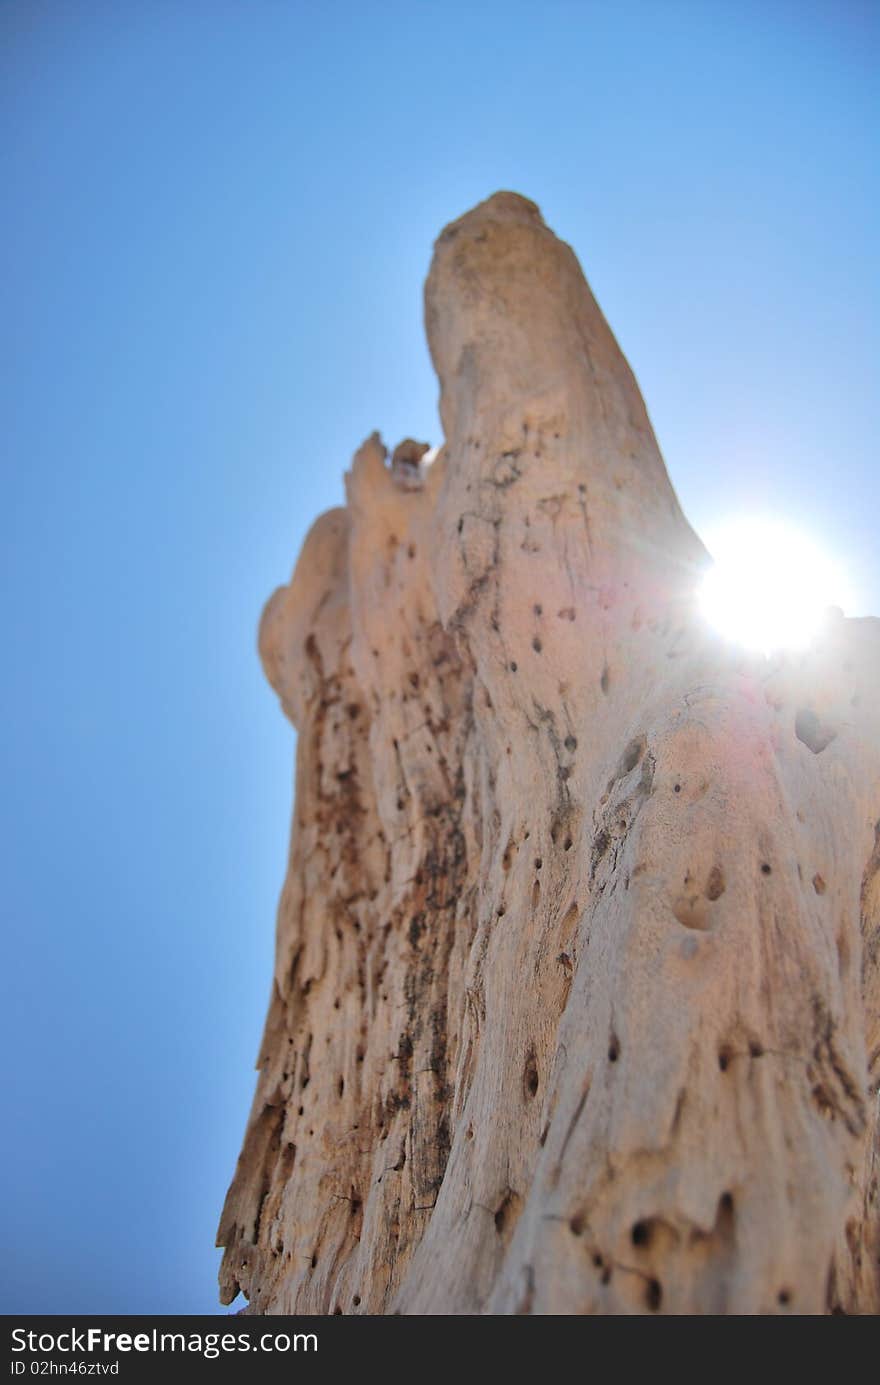 A glimpse of the sun at the back of a dead tree trunk under a clear cloudless blue sky